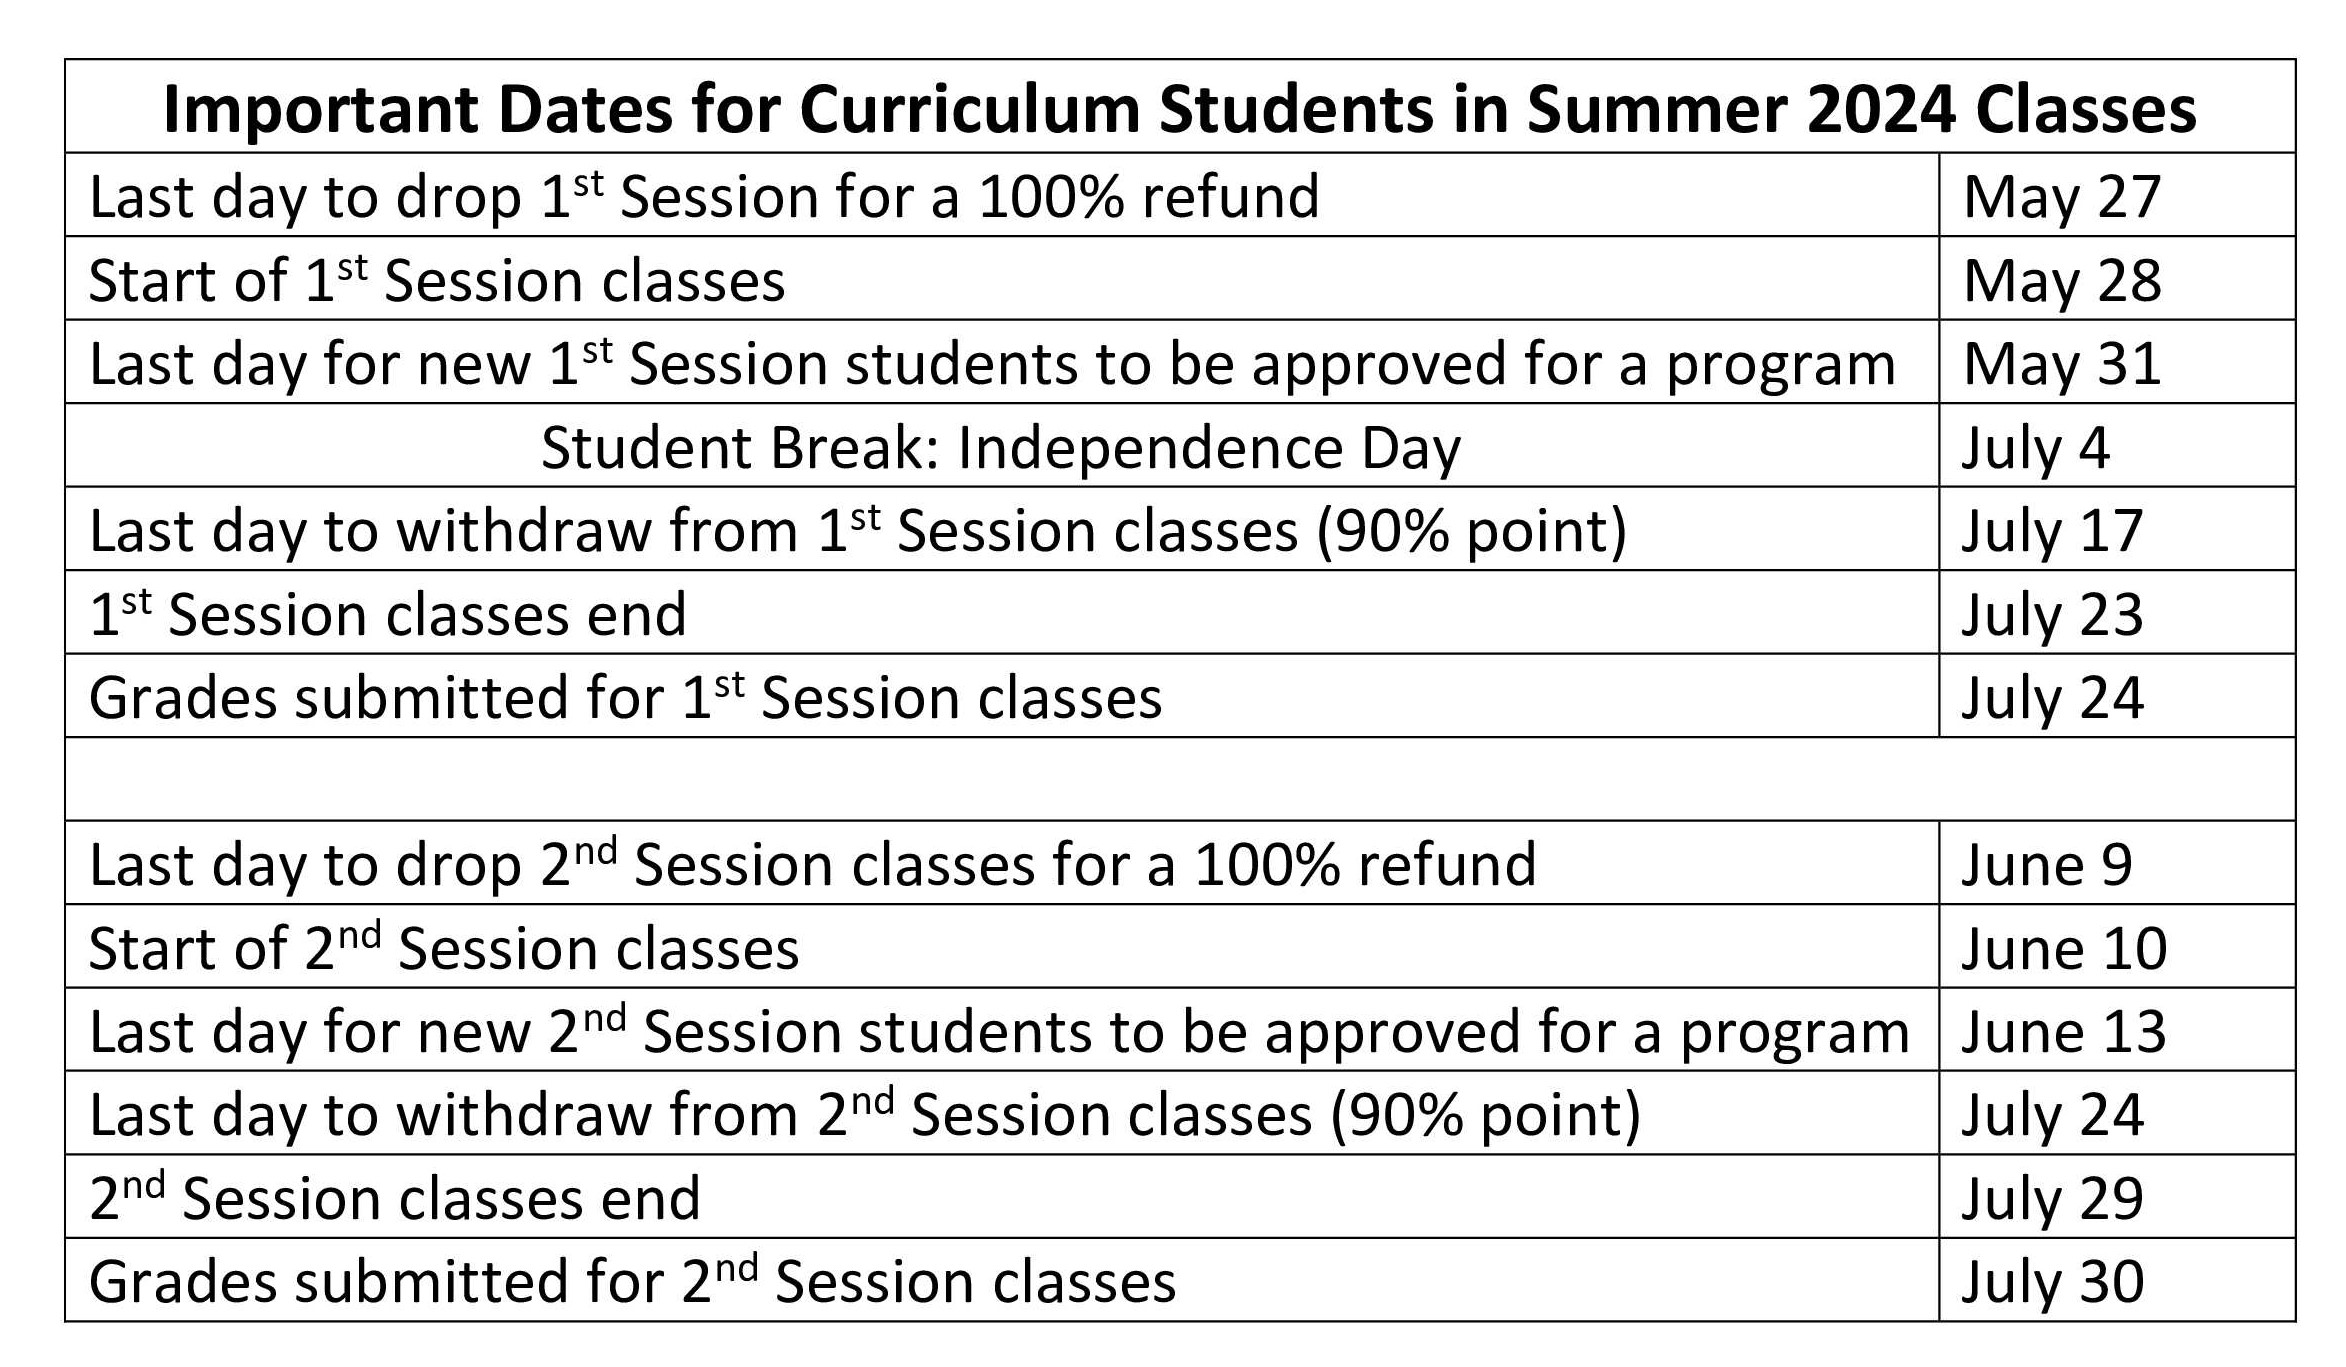 Summer 2024 Important Dates Table 031924